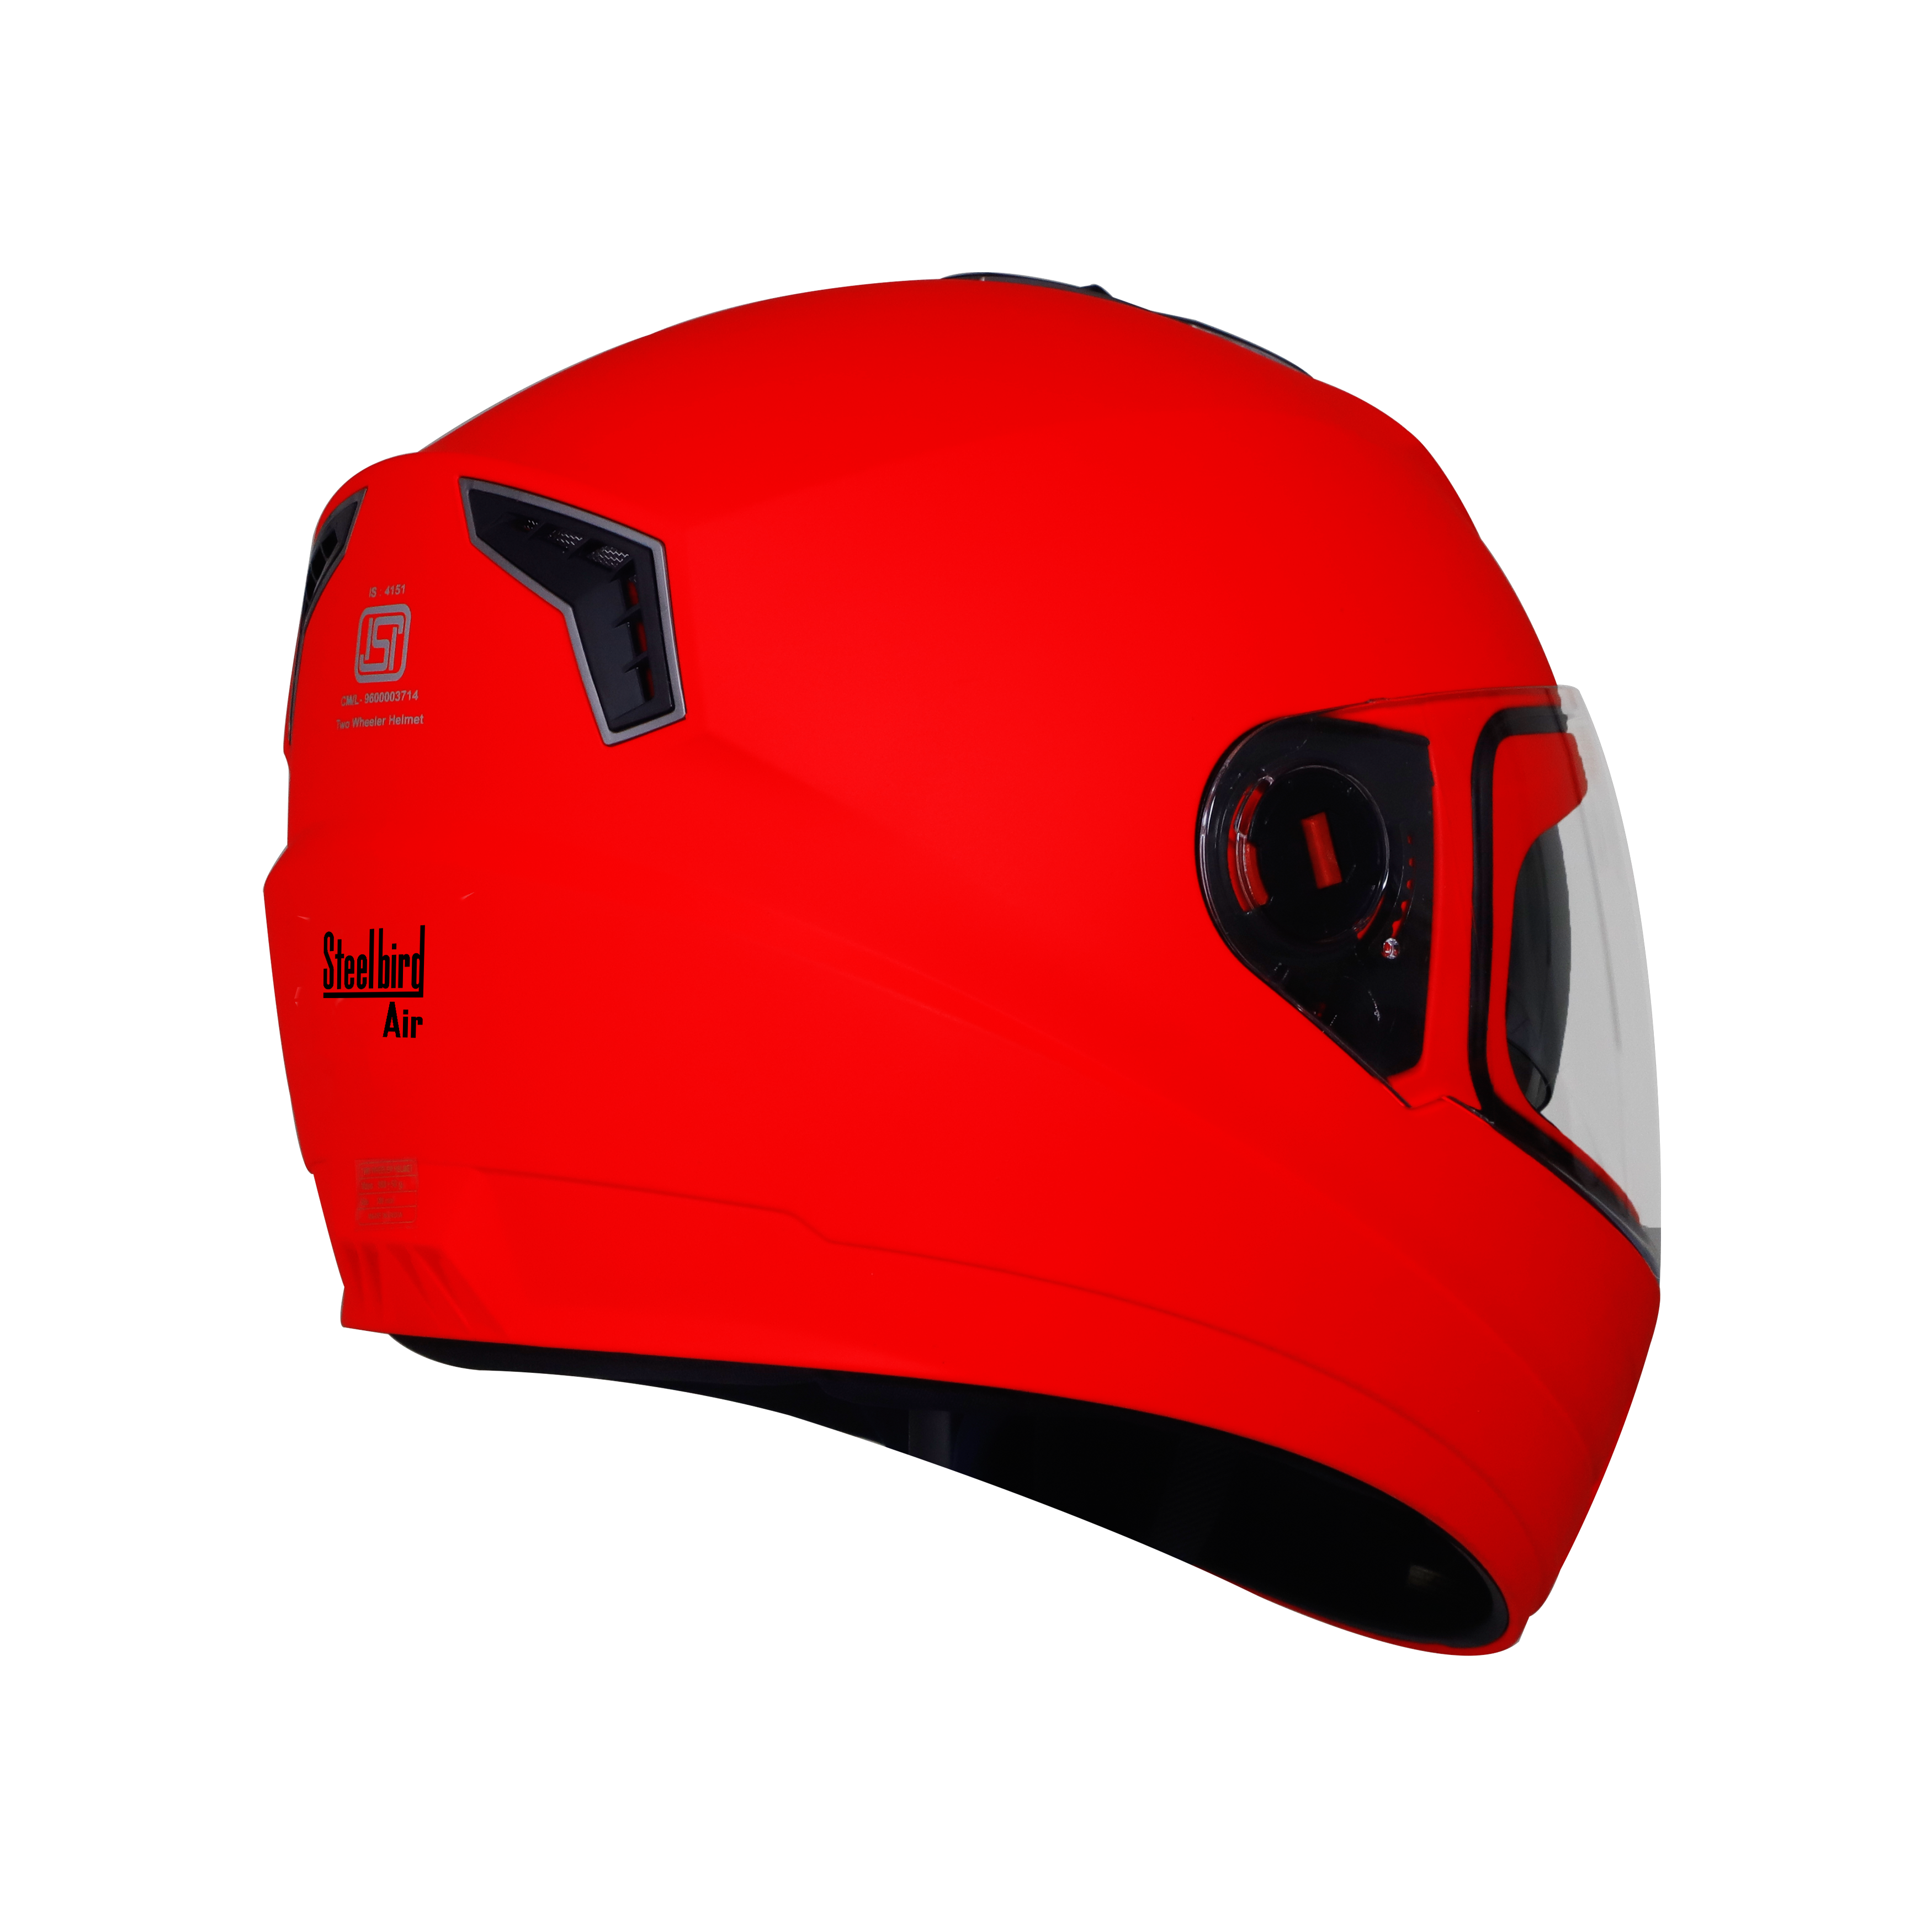 SBA-1 MAT GLOSSY FLUO RED WITH CHROME SILVER INNER SUN SHIELD